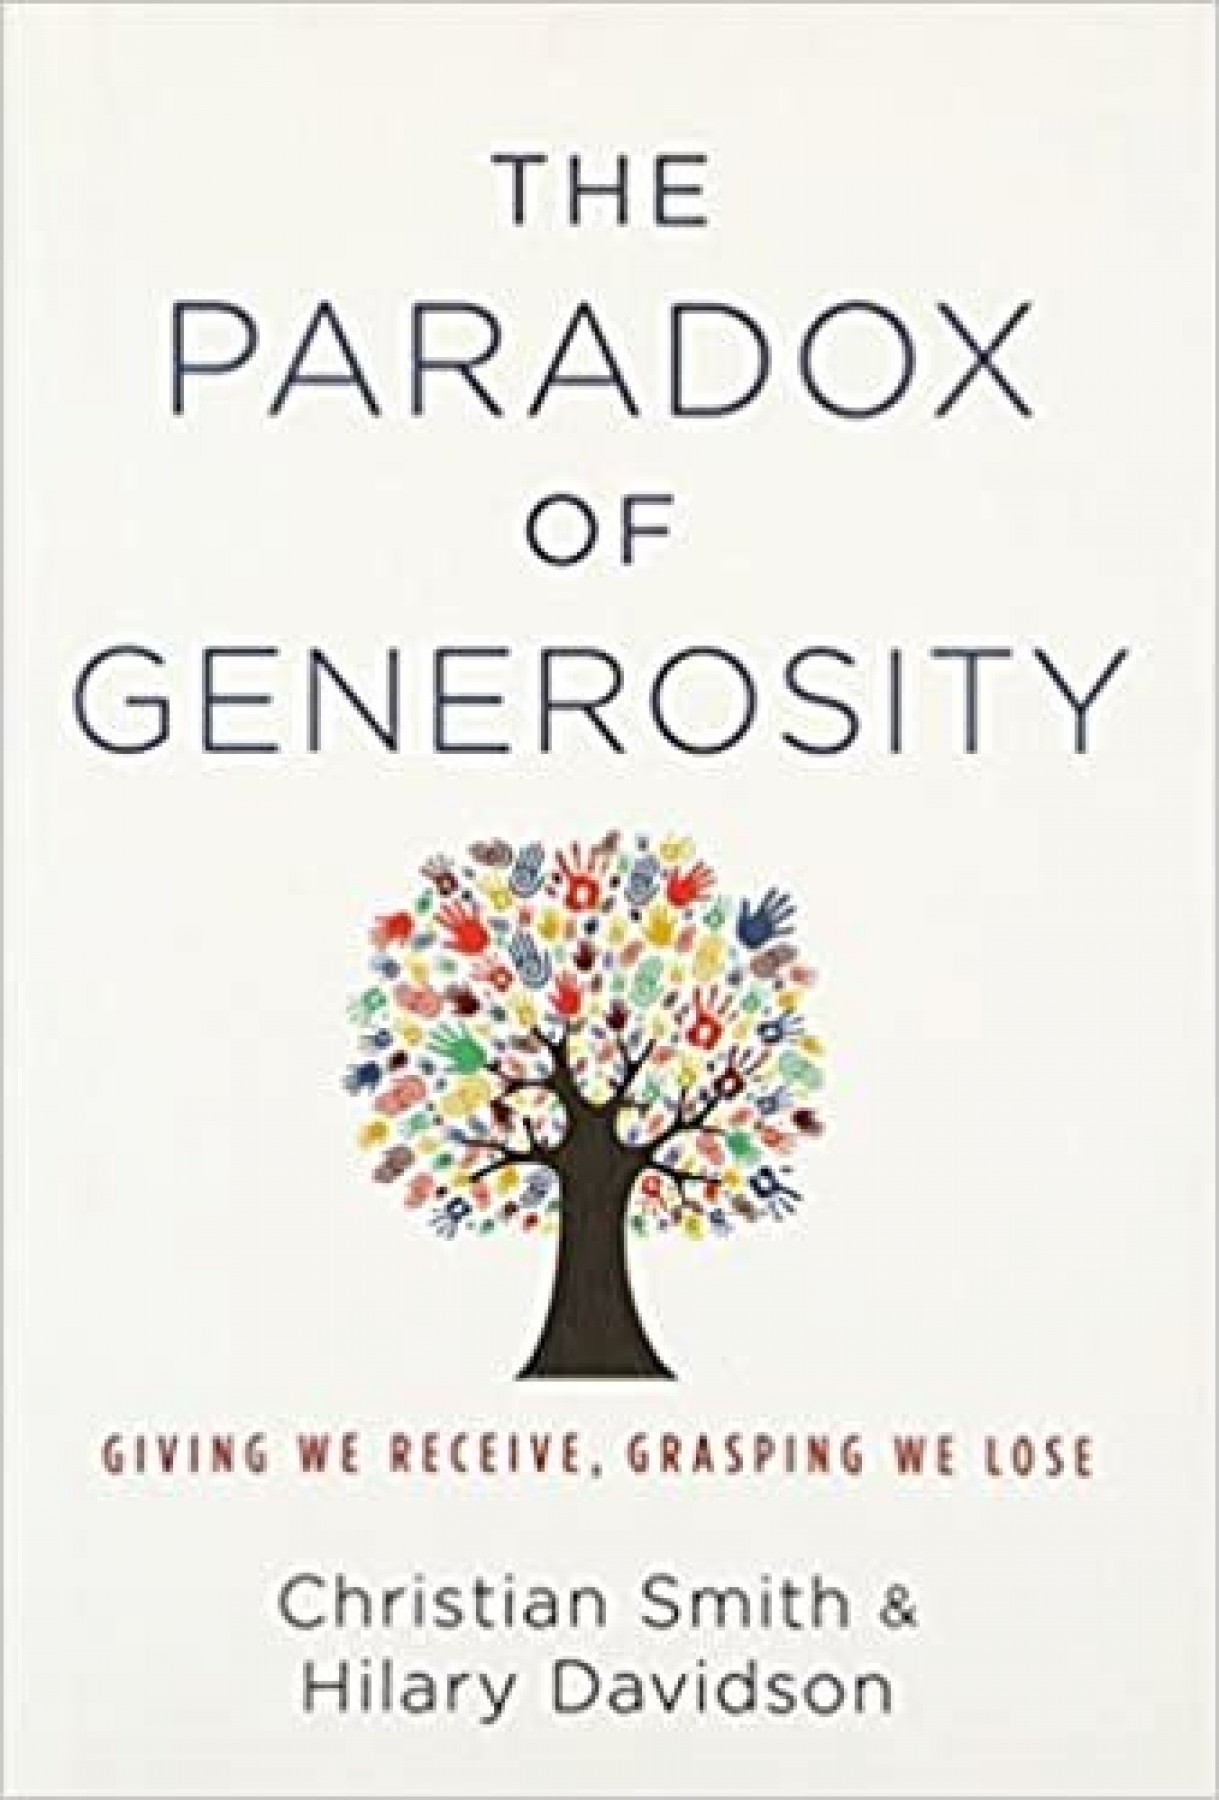 The Paradox of Generosity: Giving we receive, grasping we lose